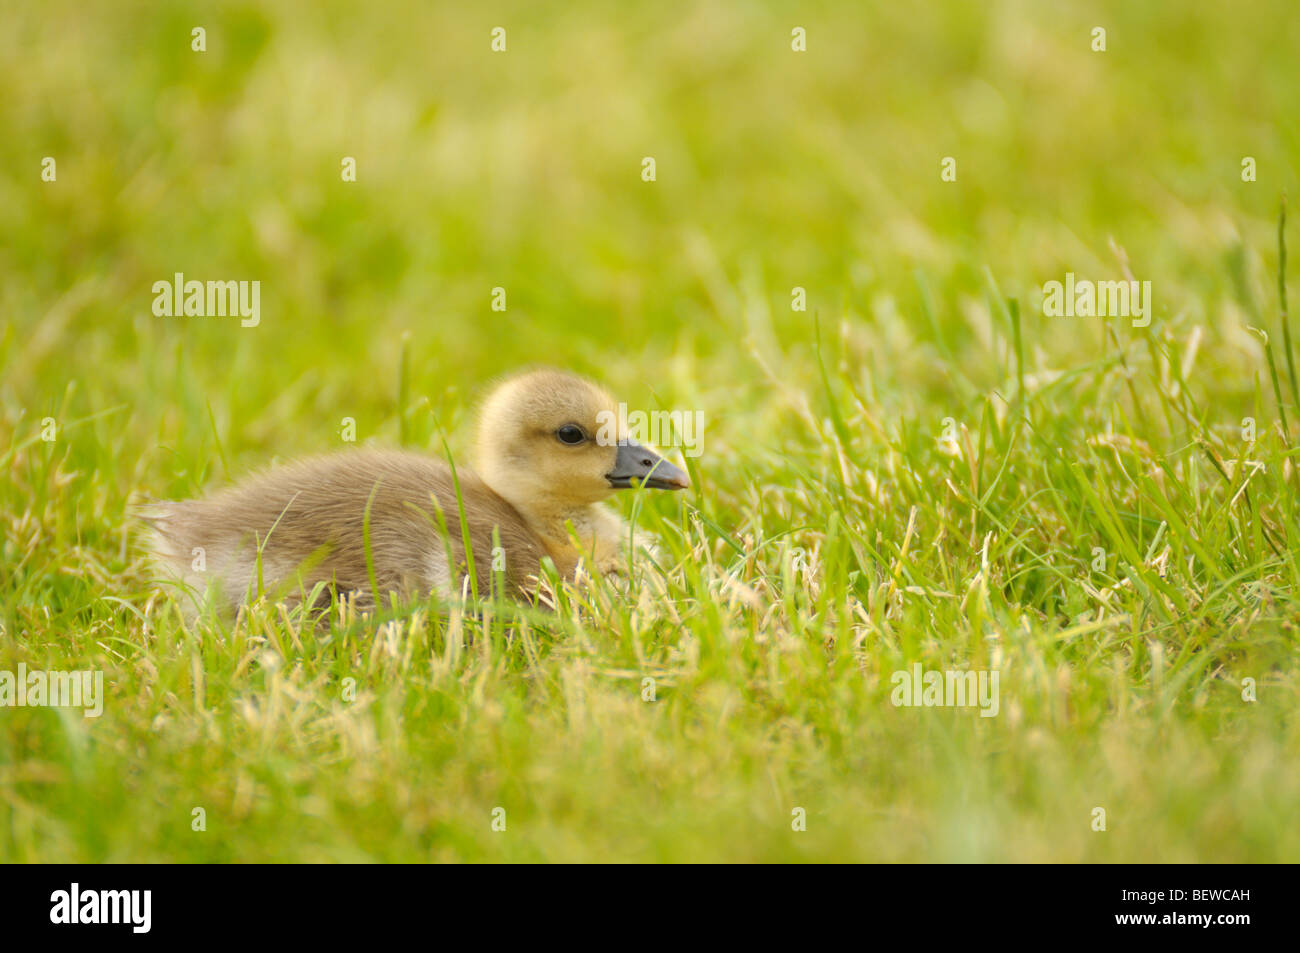 Gosling sitting in grass, side view Stock Photo